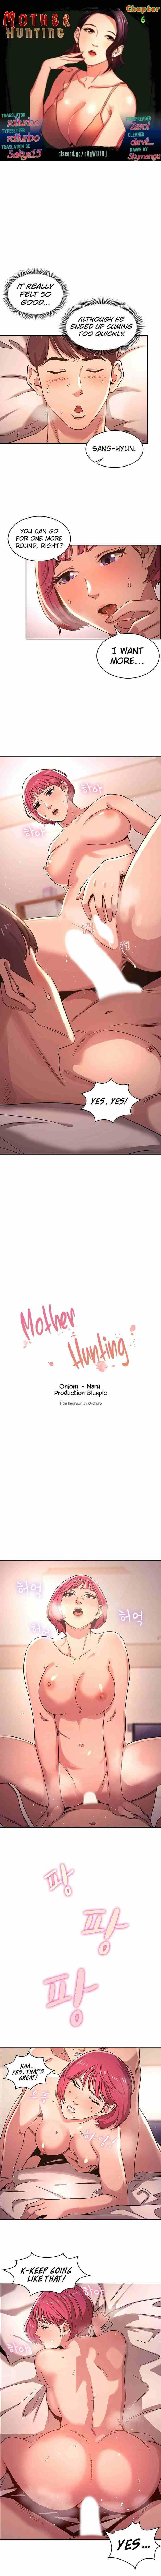 Mother Hunting 43